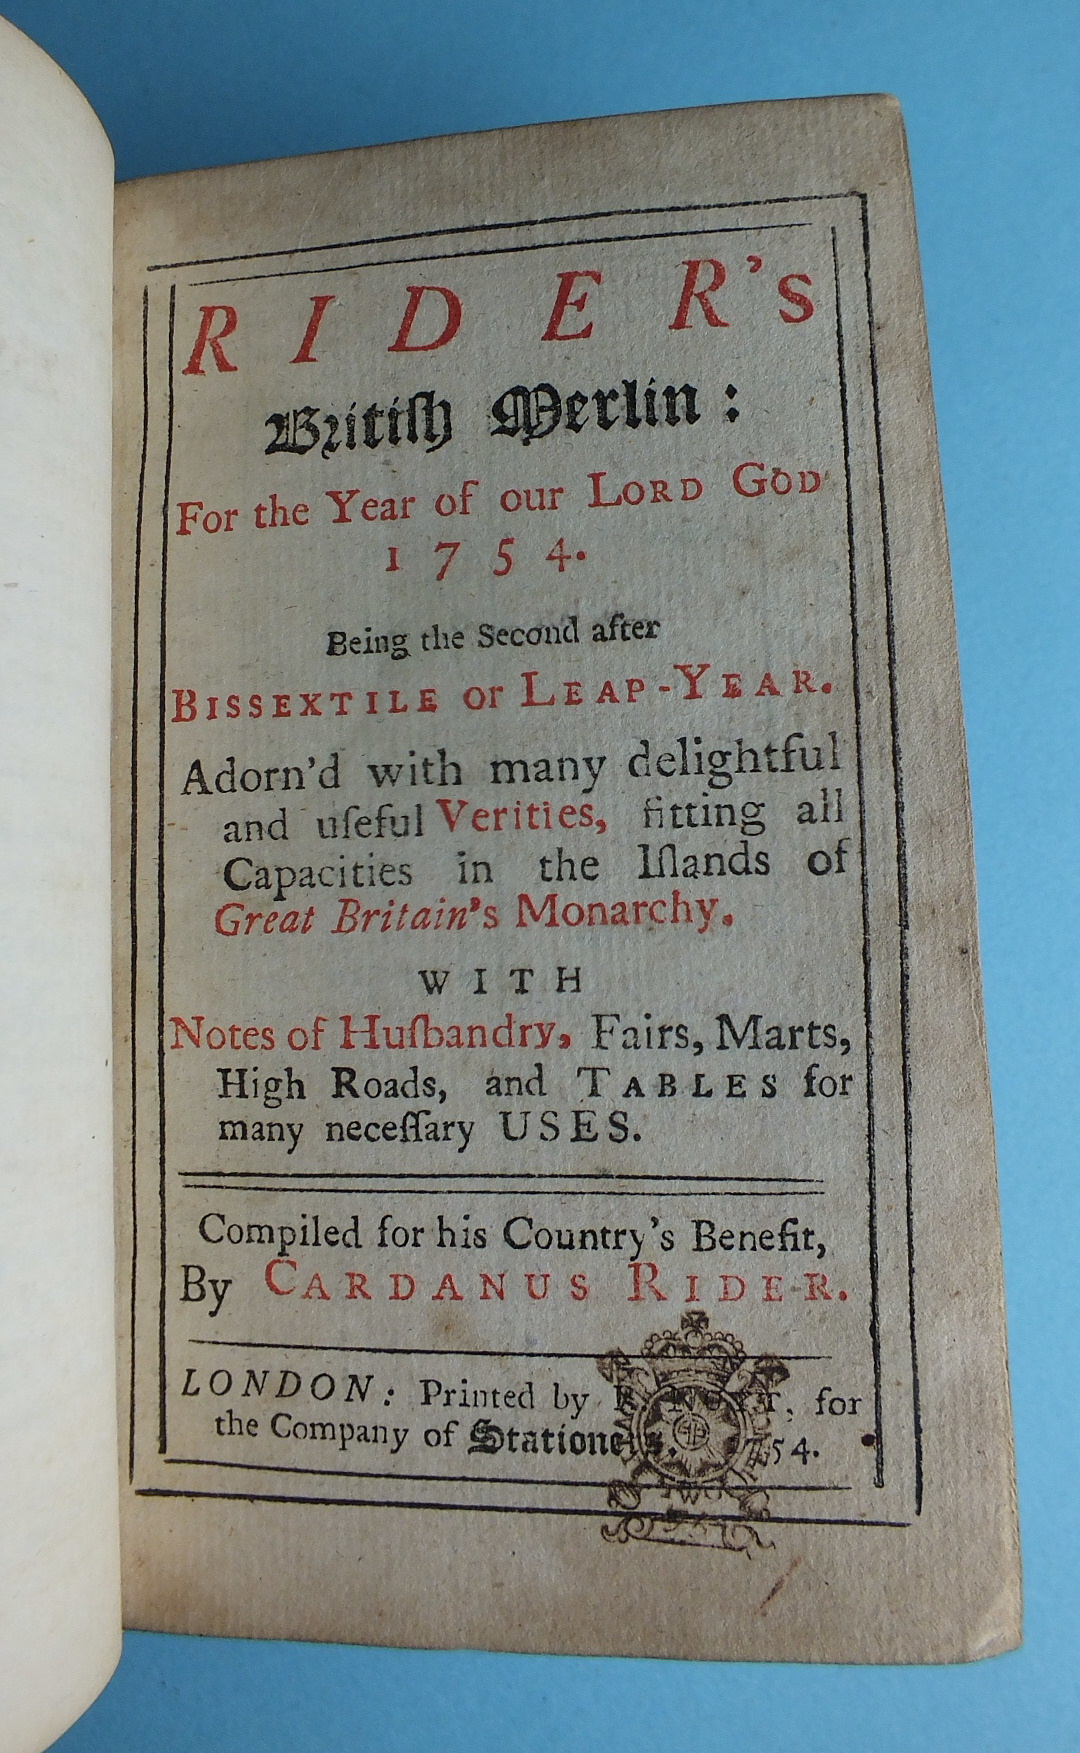 The Court and City Register and Rider's British Merlin for the Year of our Lord God 1754, fldg - Image 3 of 4